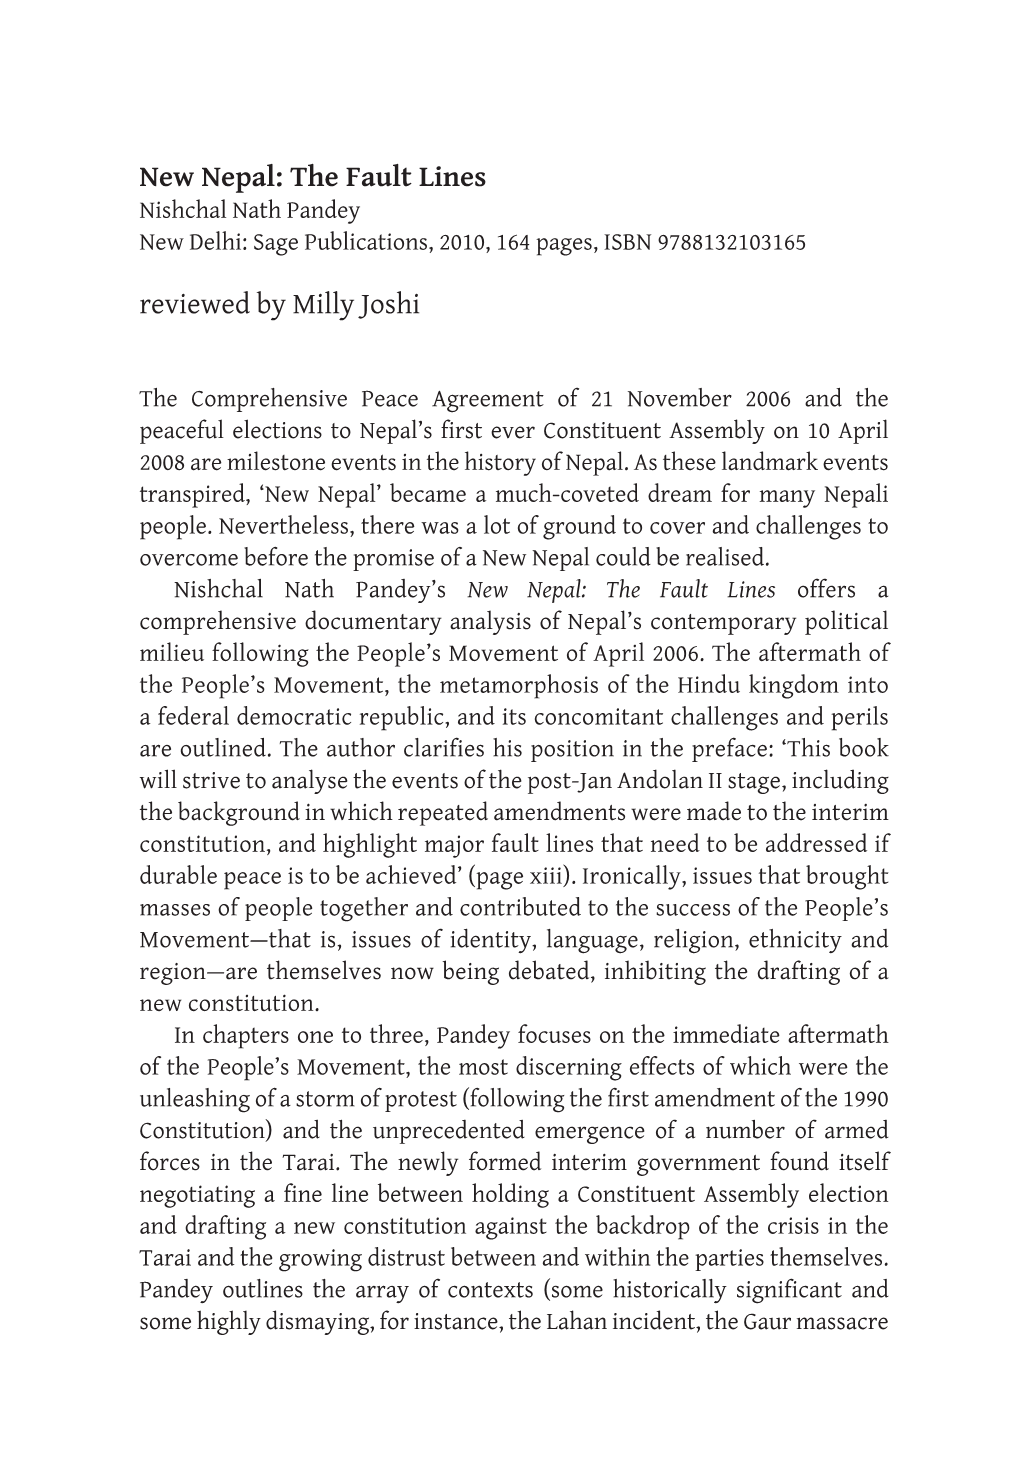 New Nepal: the Fault Lines Reviewed by Milly Joshi